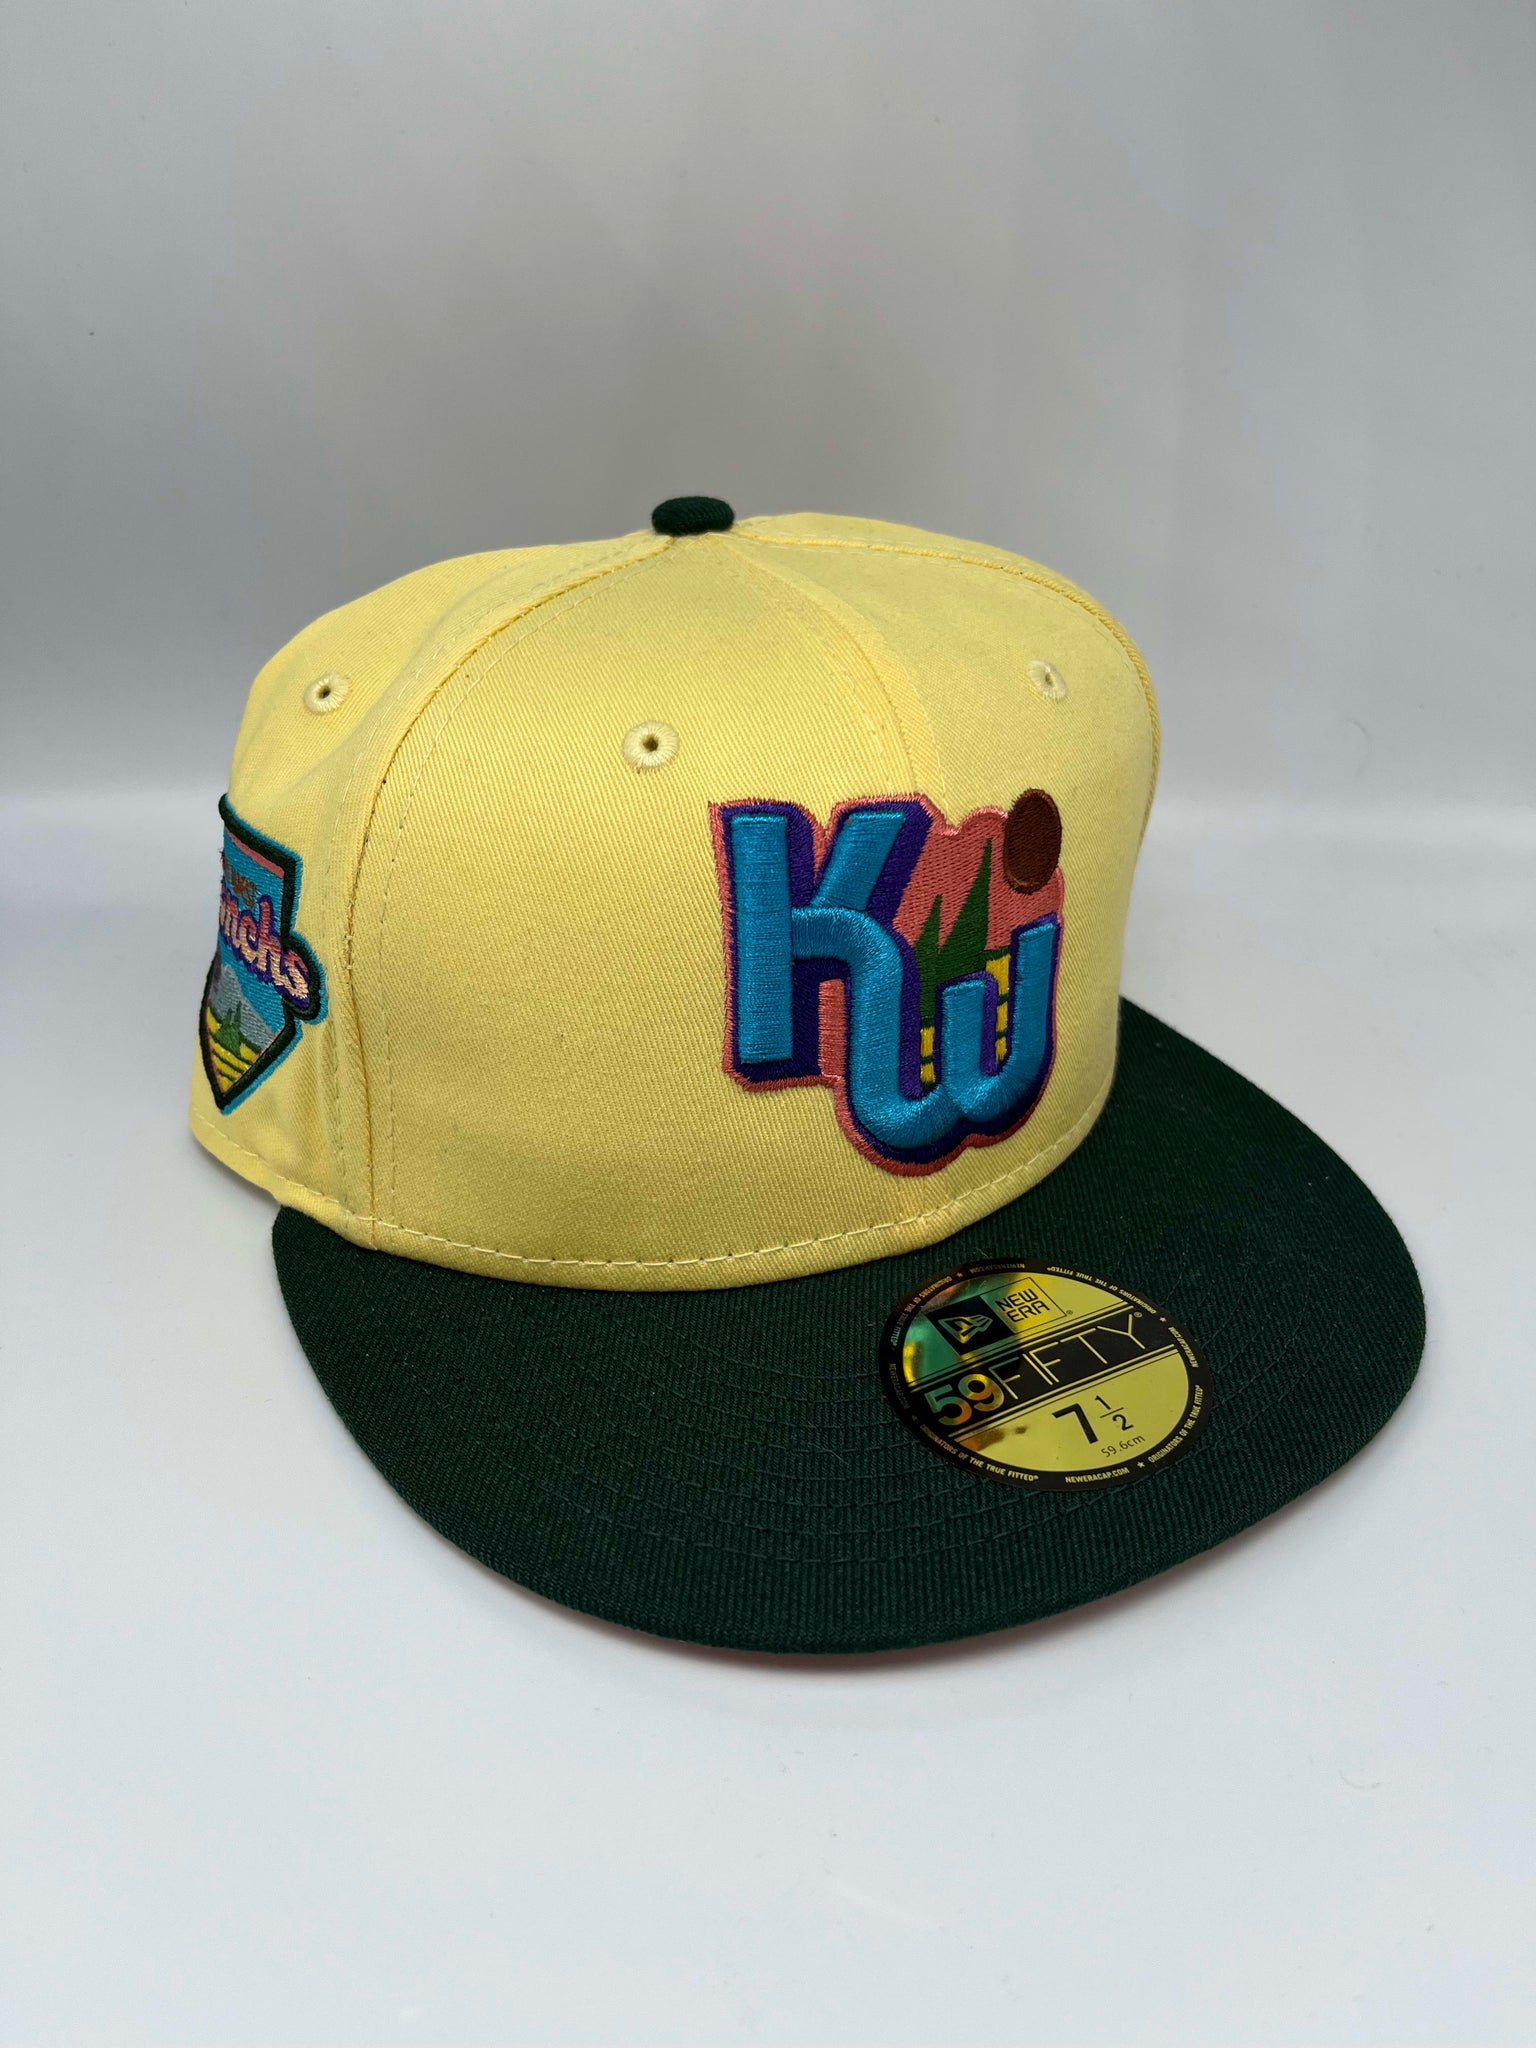 myfitteds key west conchs sean wotherspoon am97/1 inspired new era hat